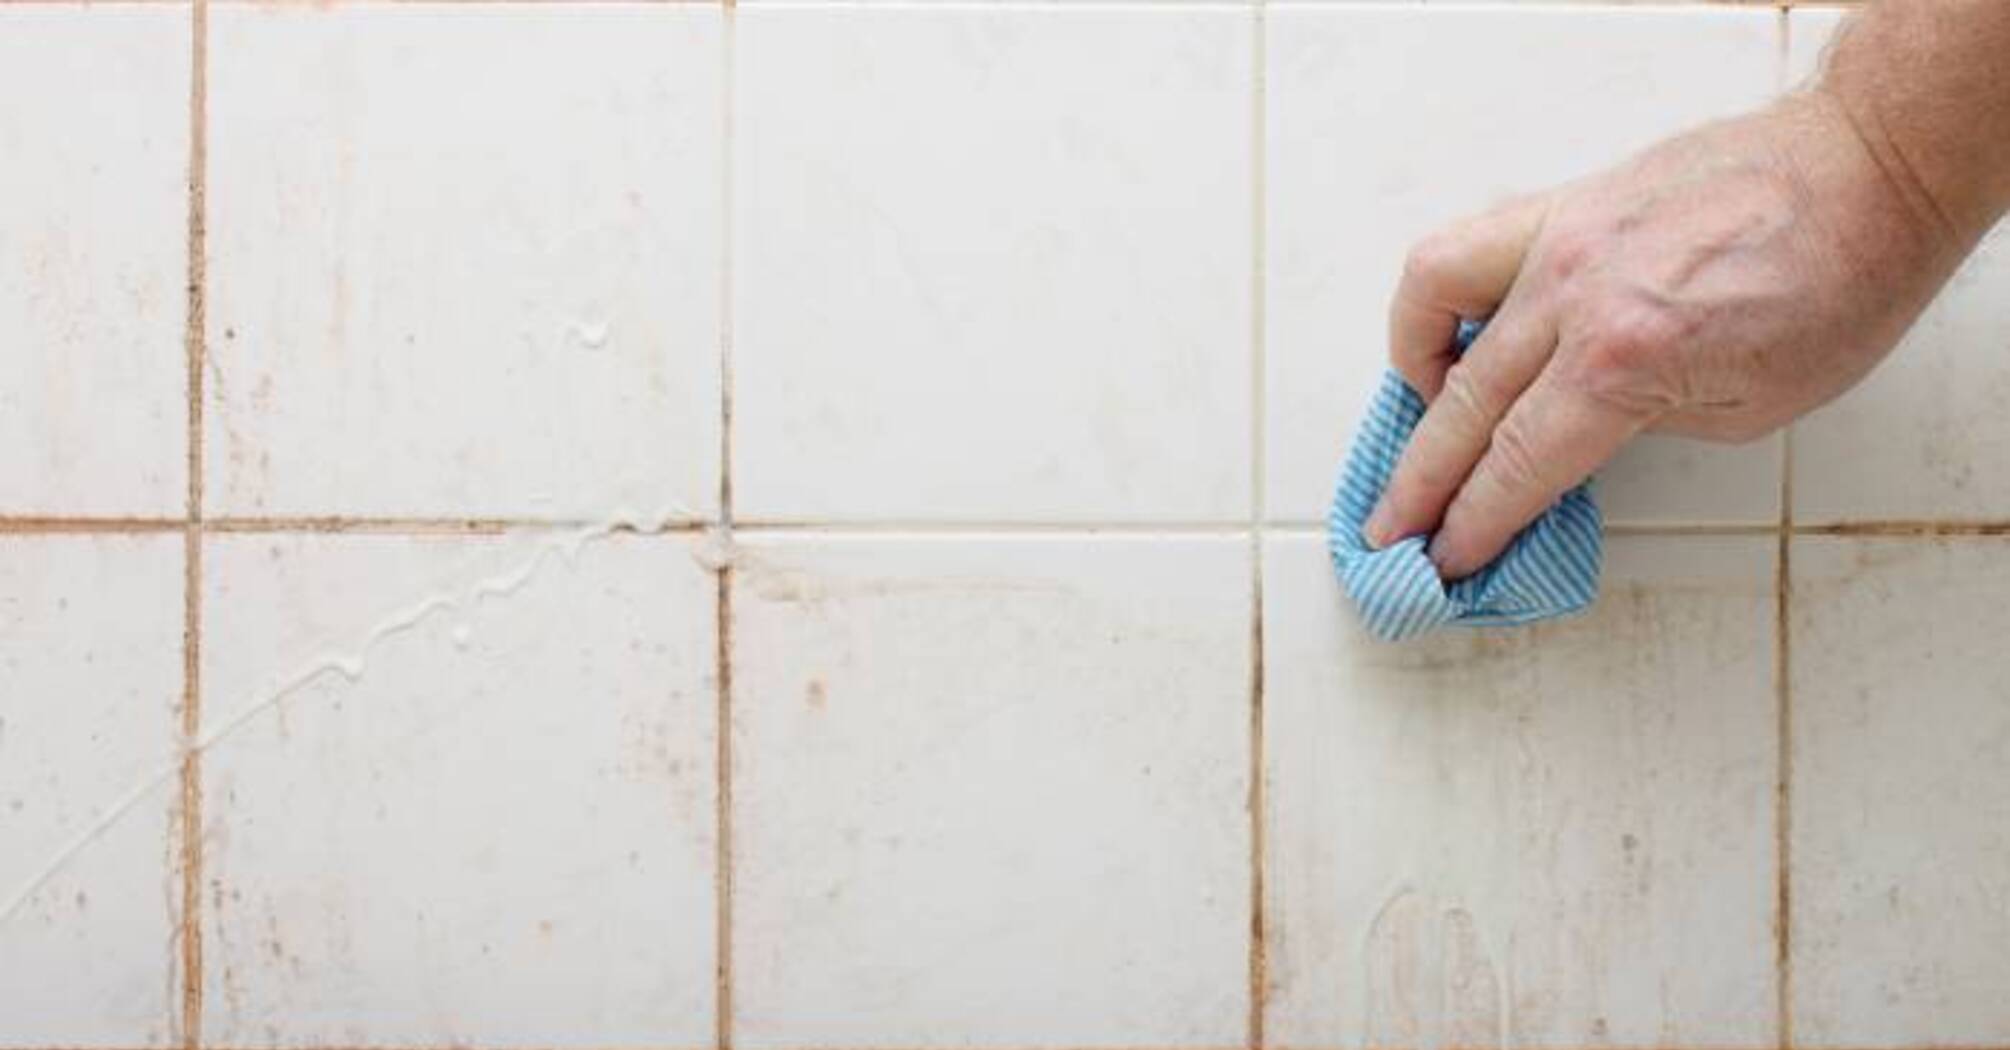 How to clean tile joints in the bathroom